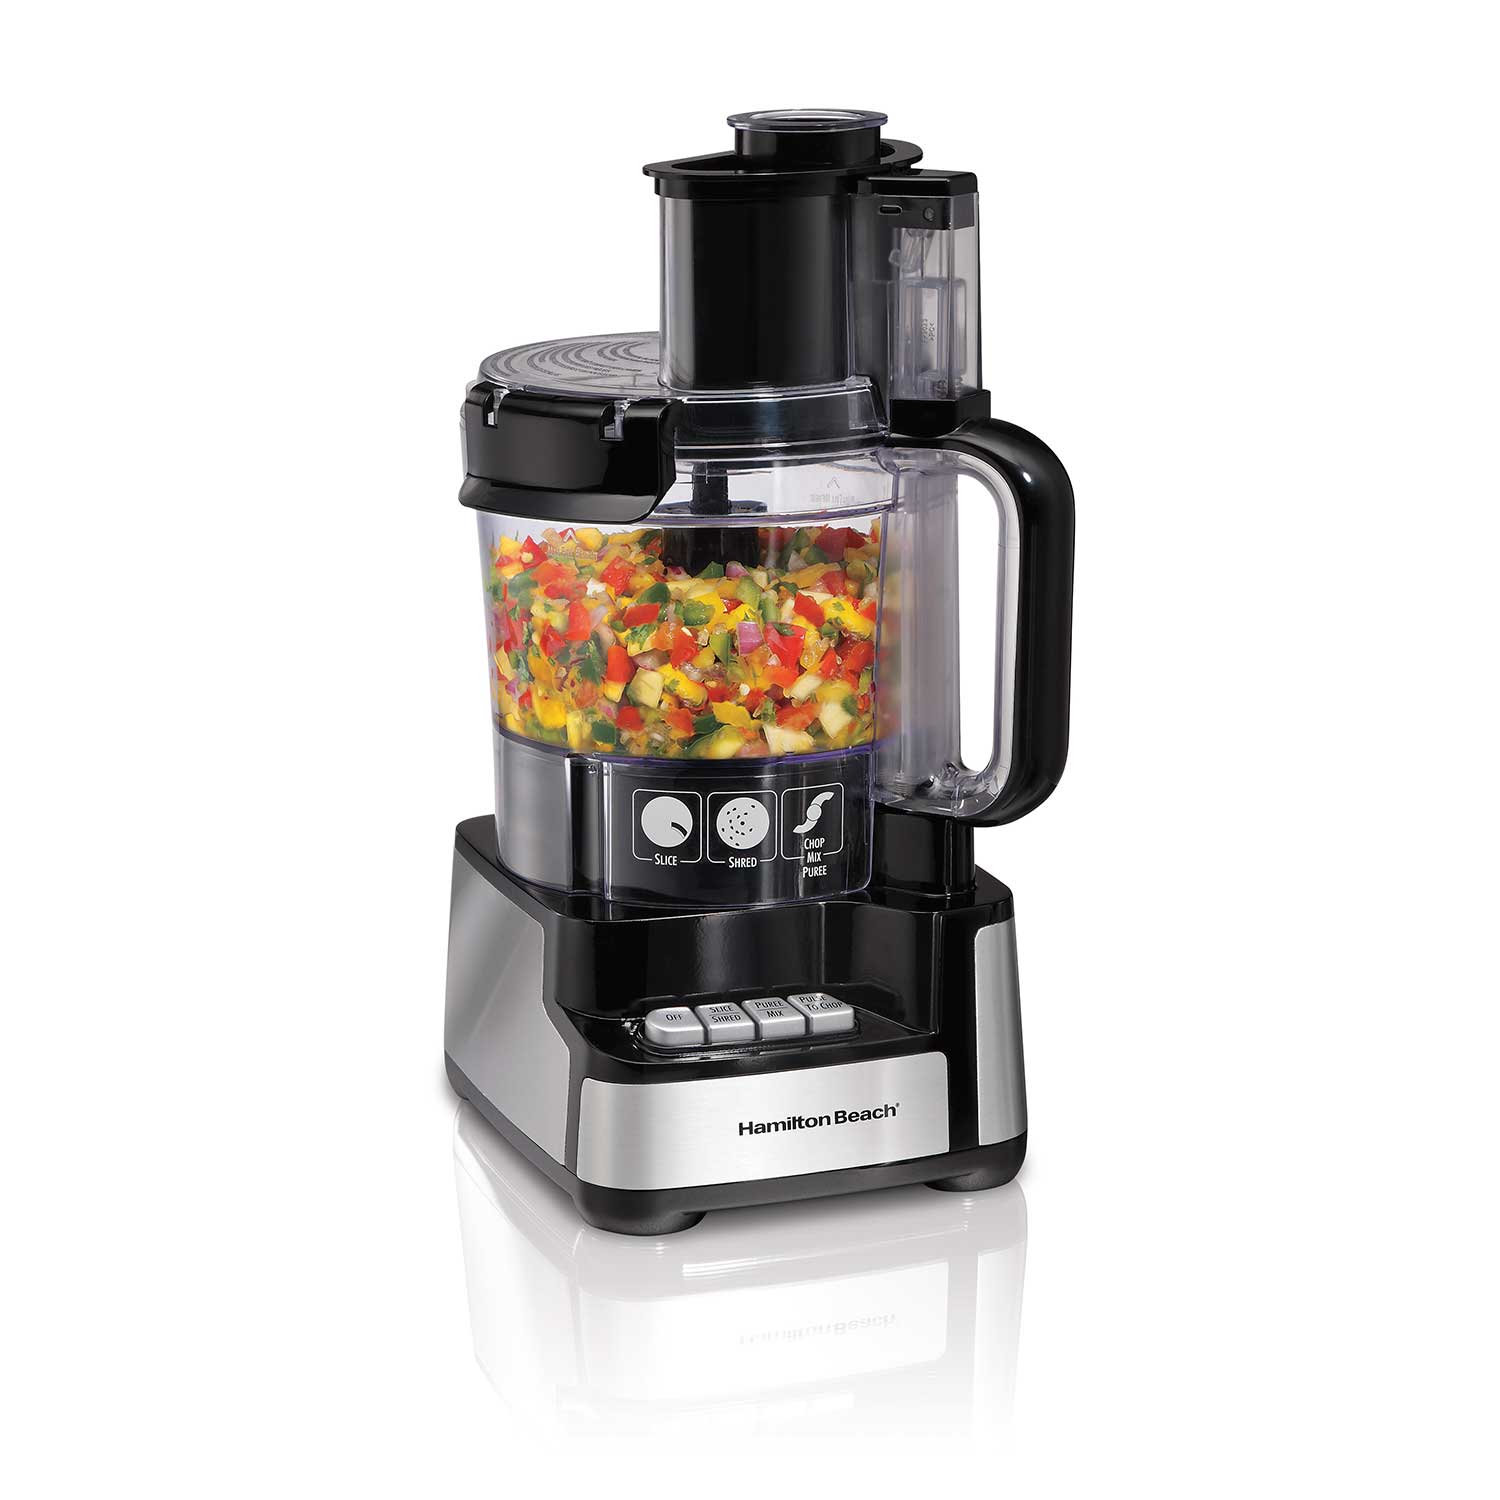 12-Cup Stack & Snap™ Food Processor, Black & Stainless (70725A)